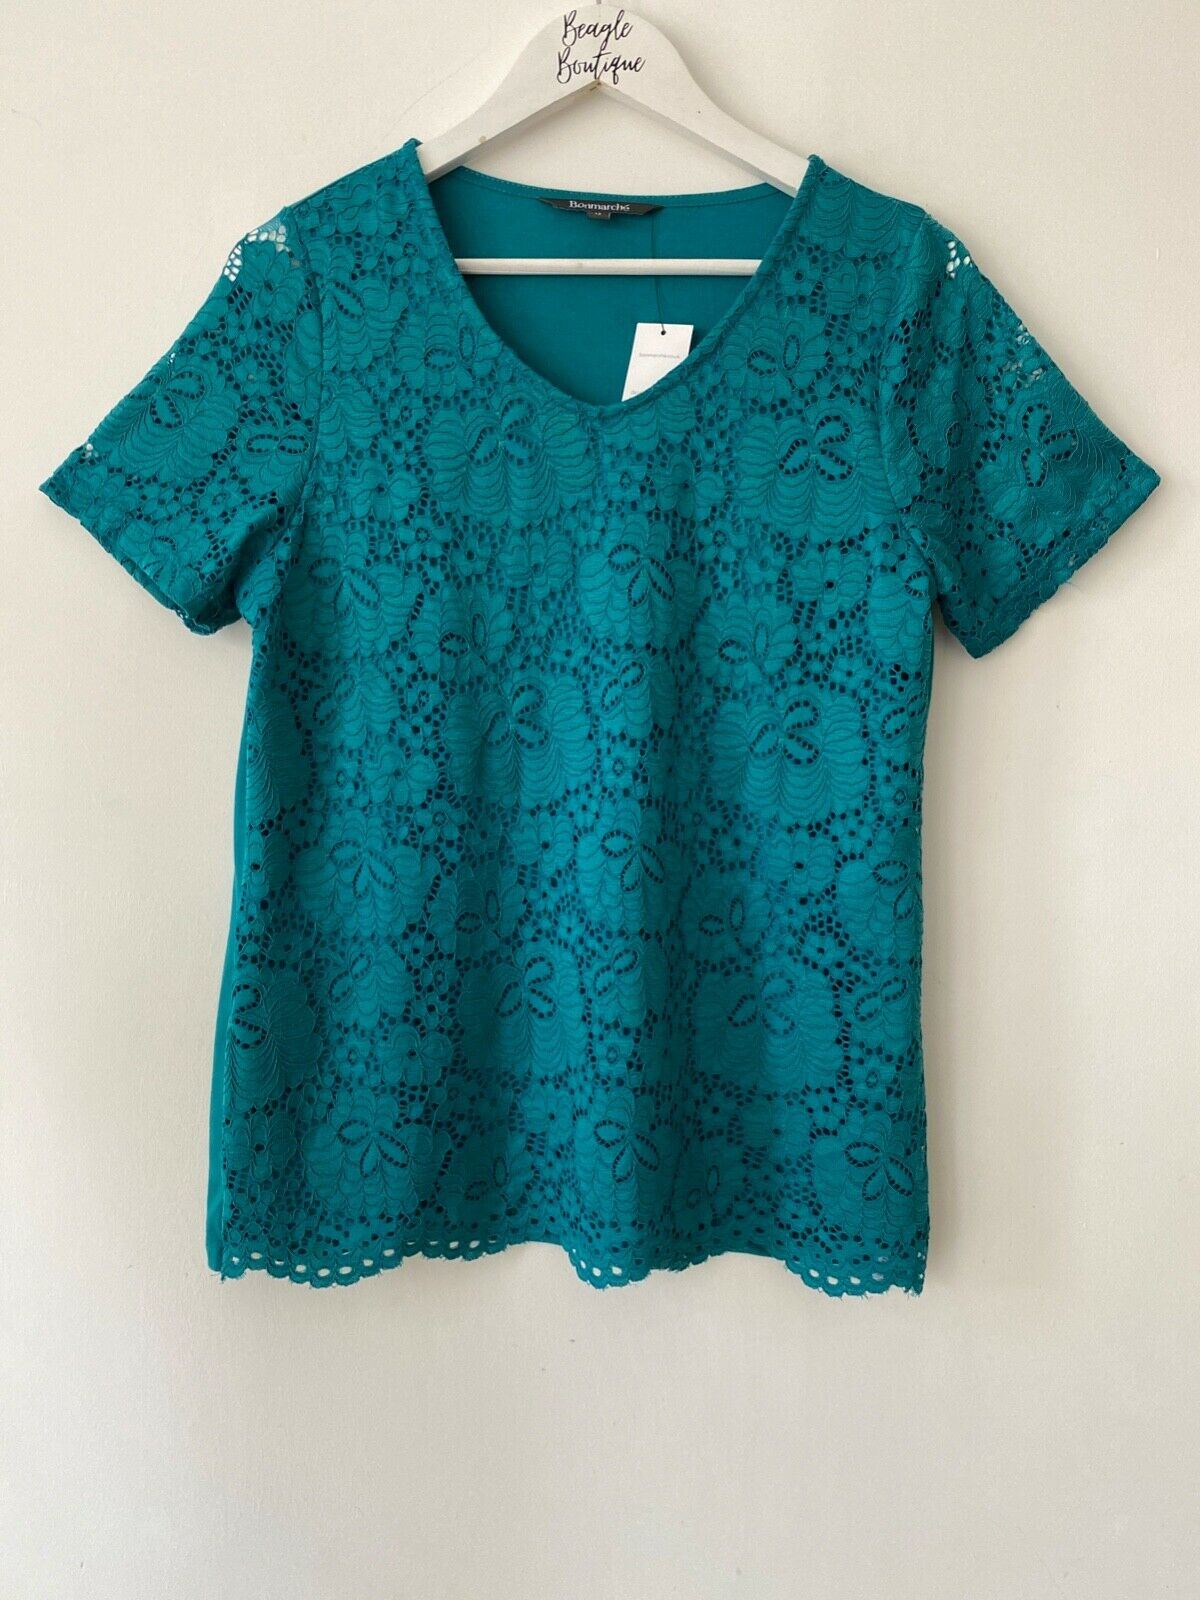 Bonmarche Green Lace Lined T-Shirt Size 12